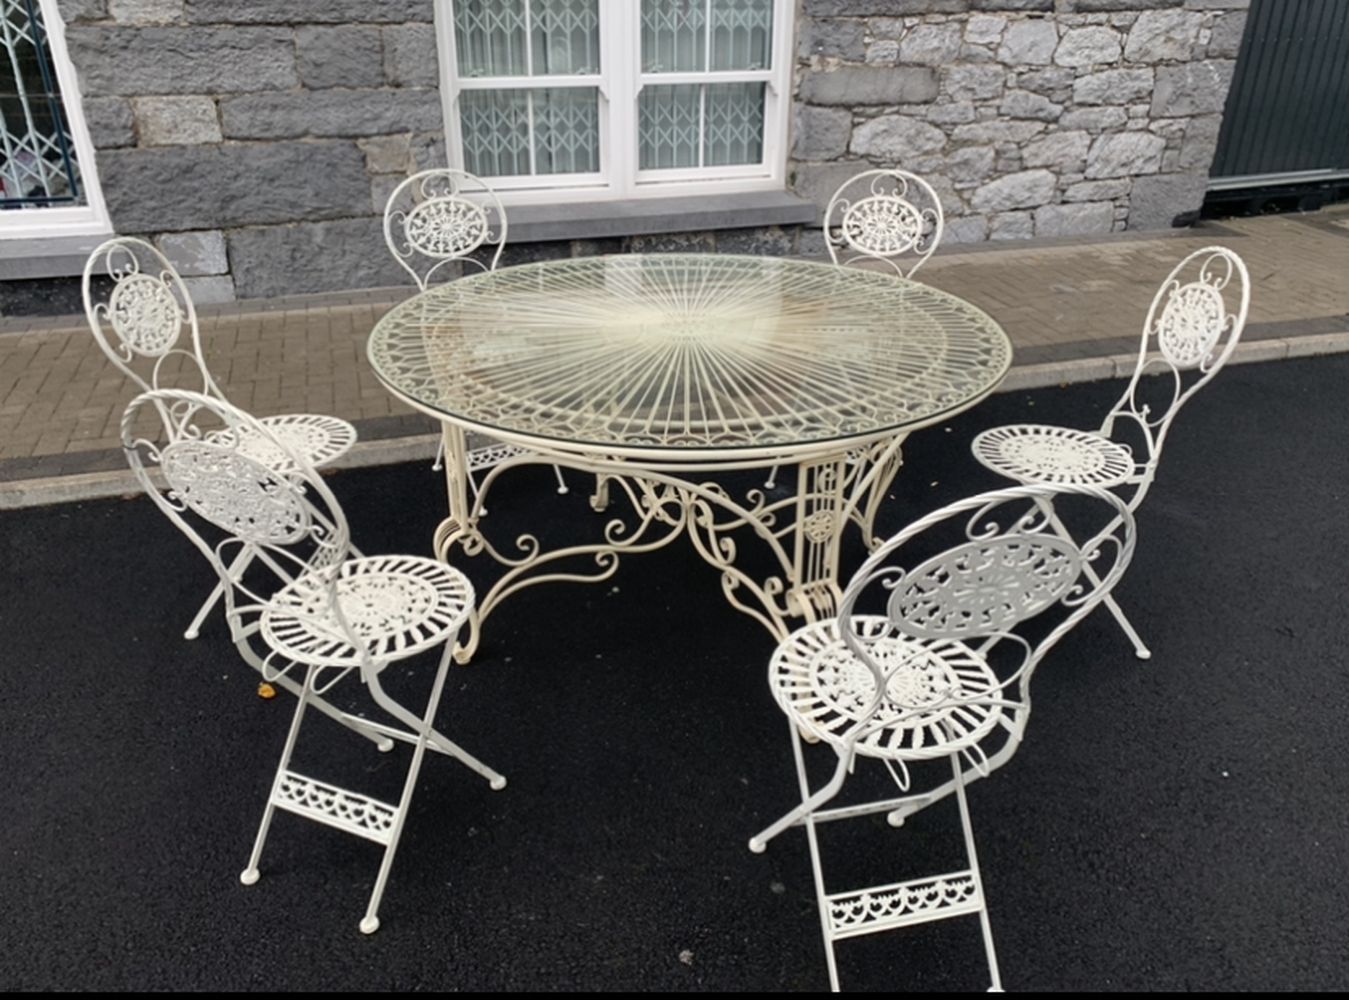 A LARGE GARDEN TABLE WITH 6 CHAIRS, table with glass top, 6ft diameter approxima&hellip;